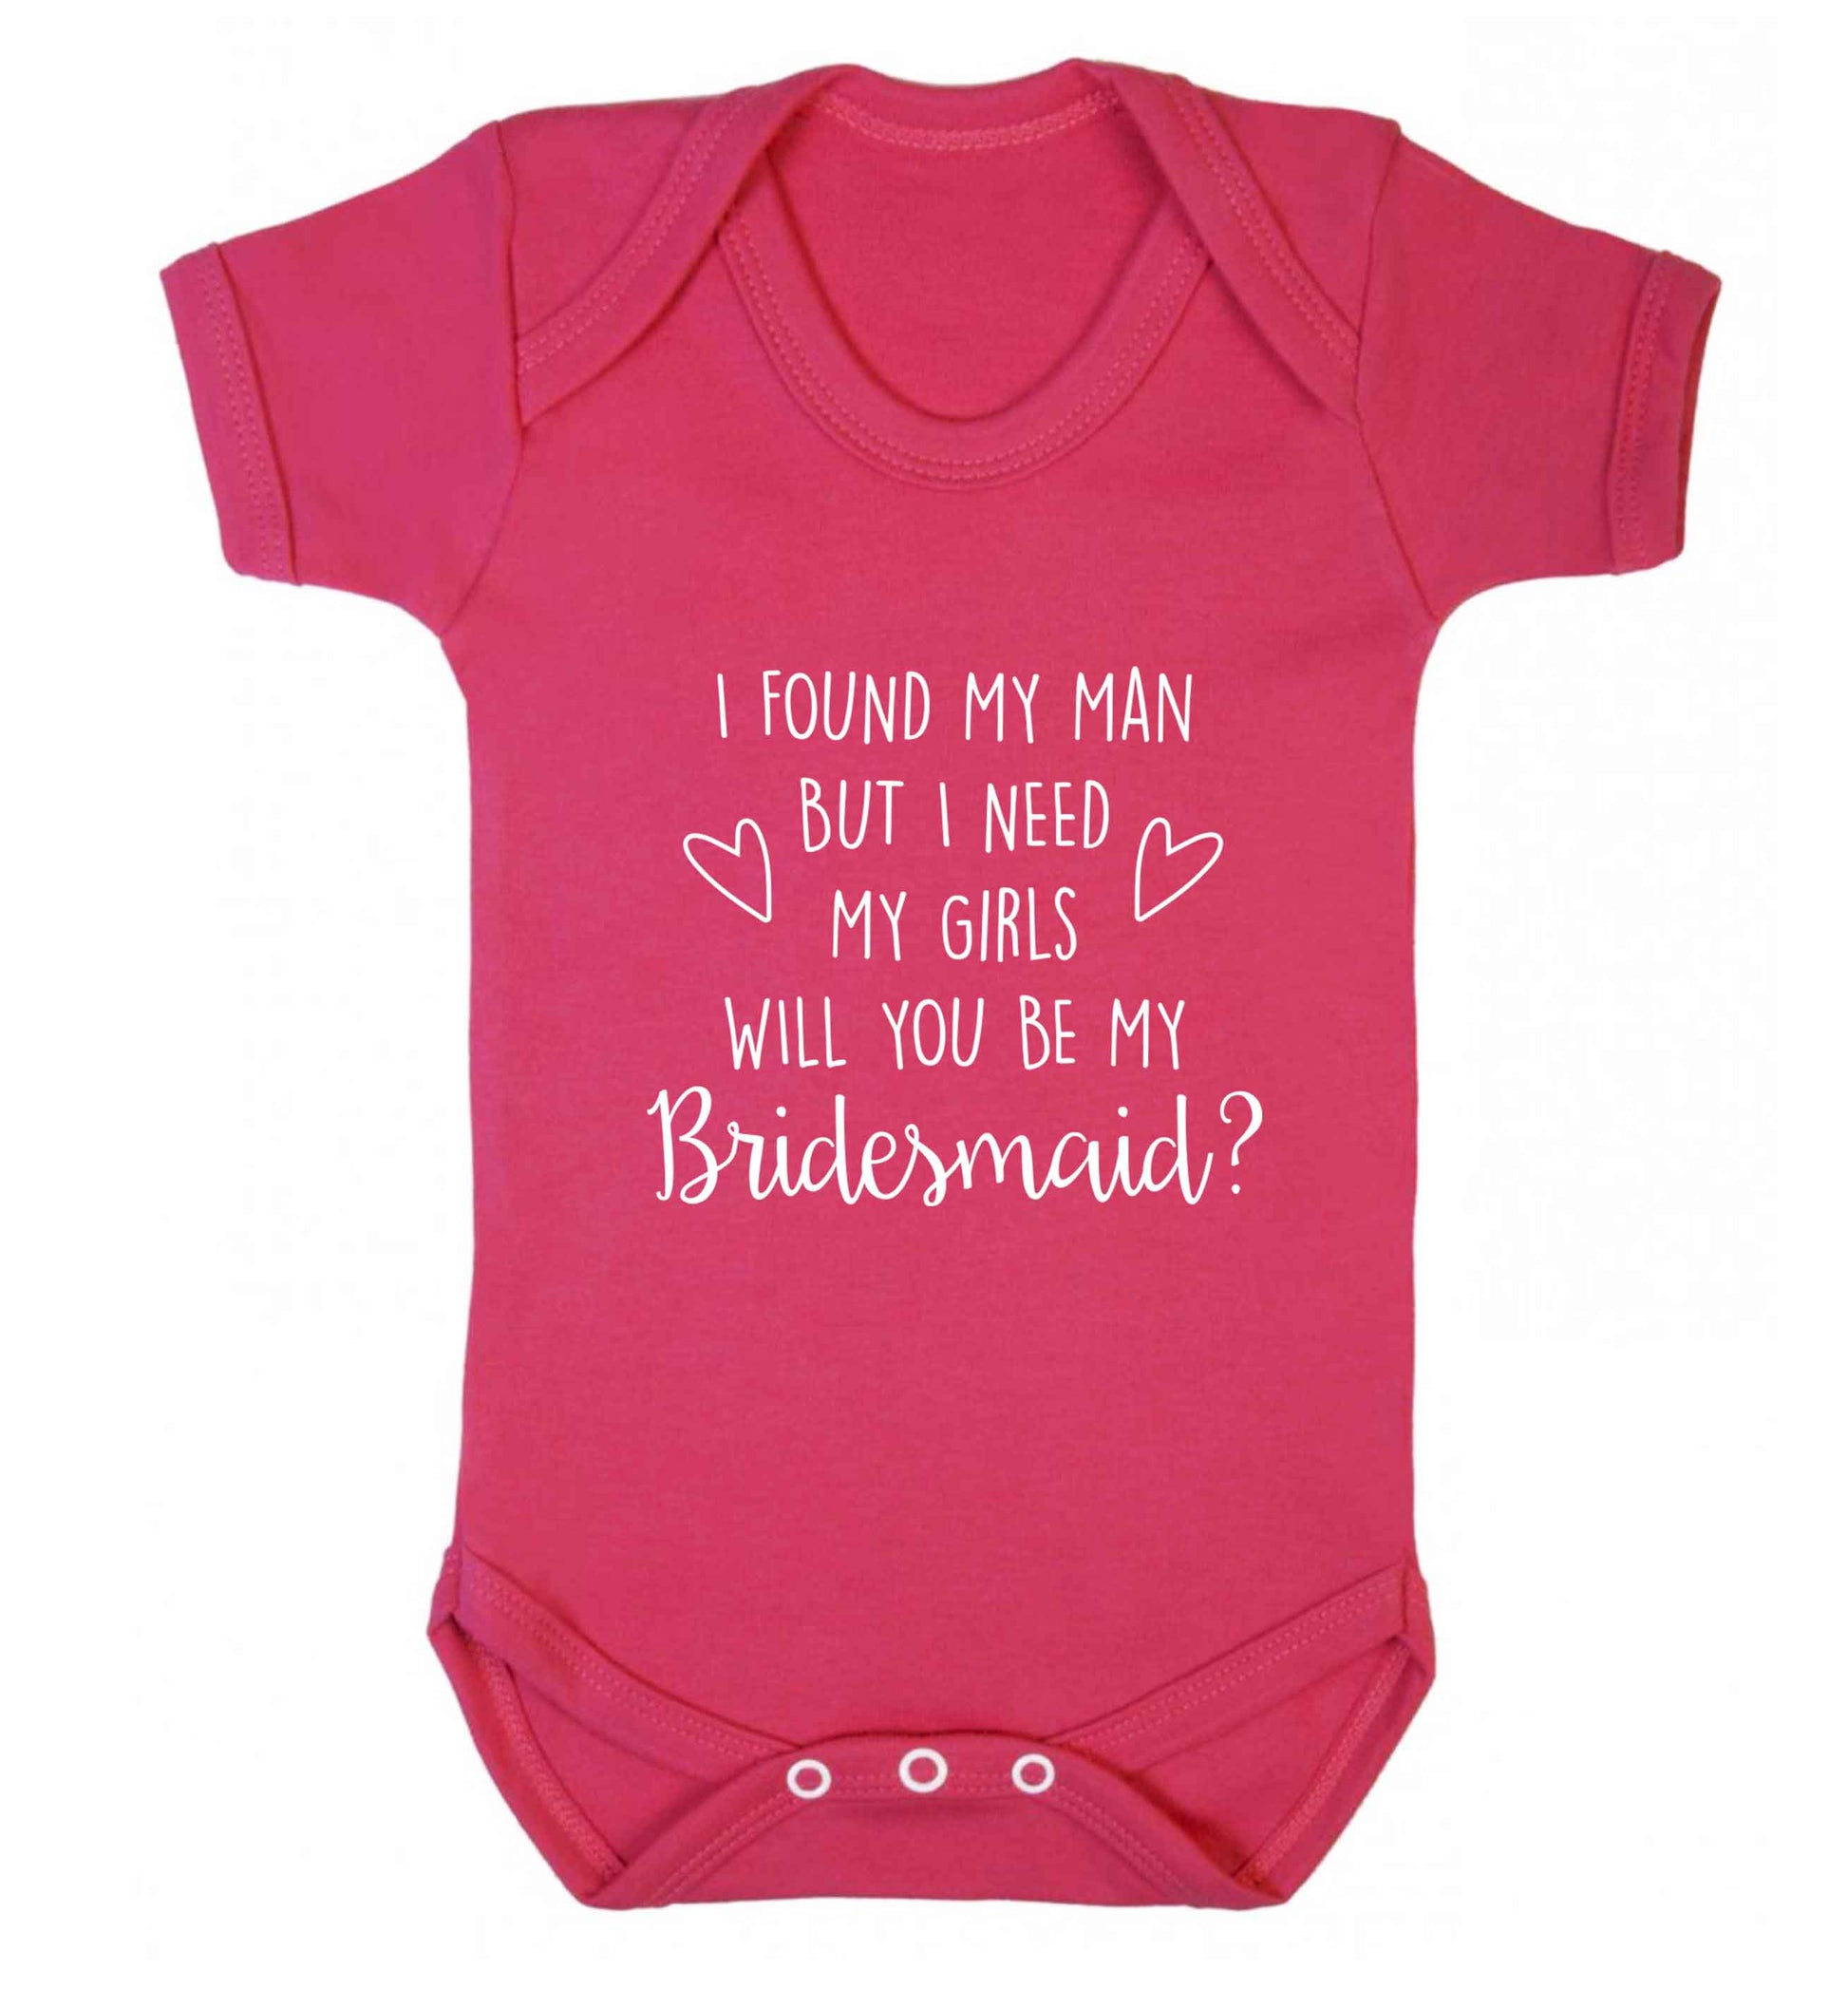 I found my man but I need my girls will you be my bridesmaid? baby vest dark pink 18-24 months